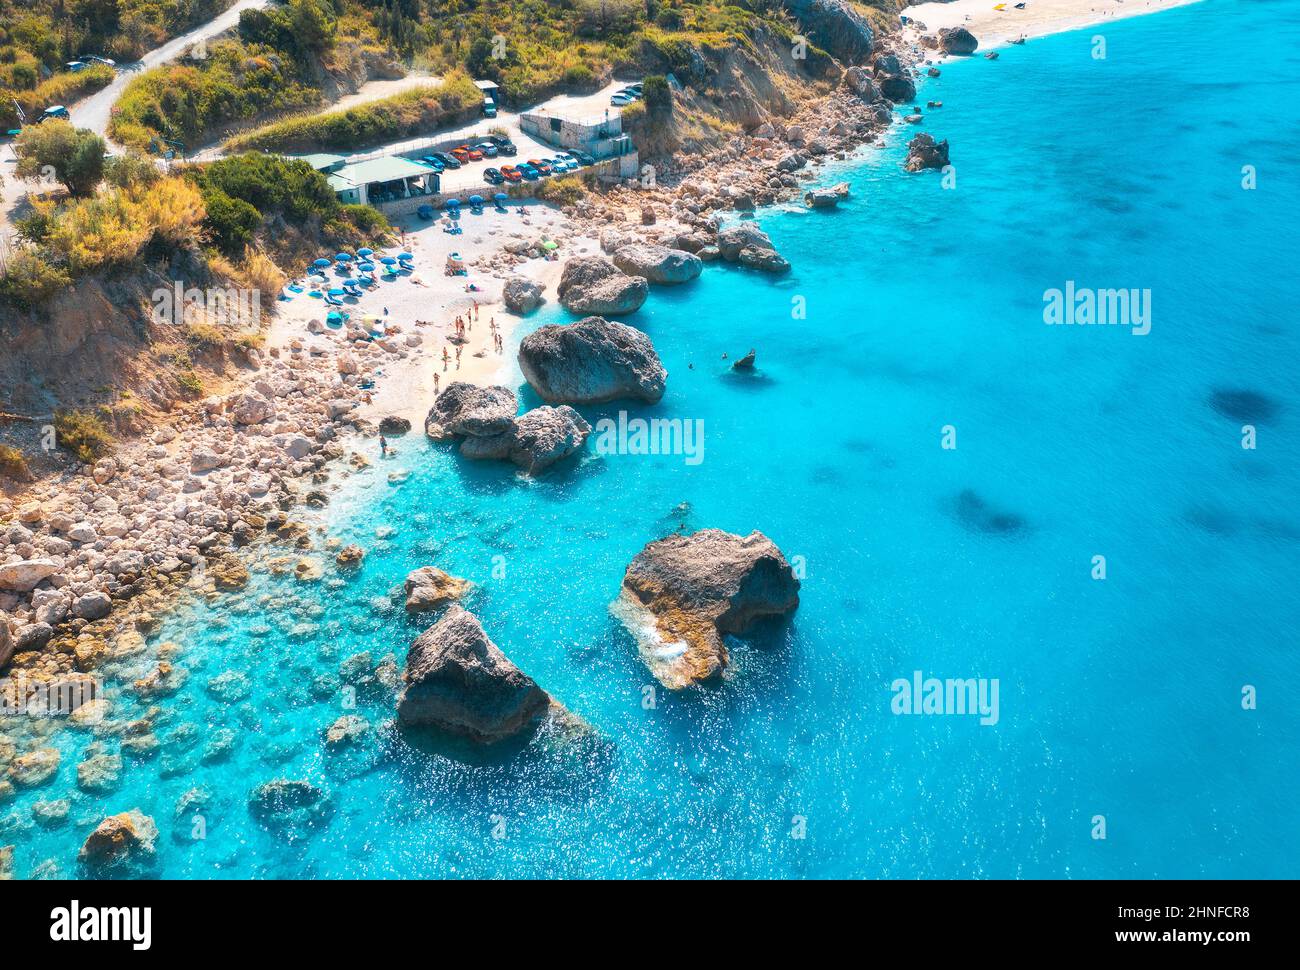 Aerial view of blue sea, beach with umbrellas, rocks in water Stock Photo